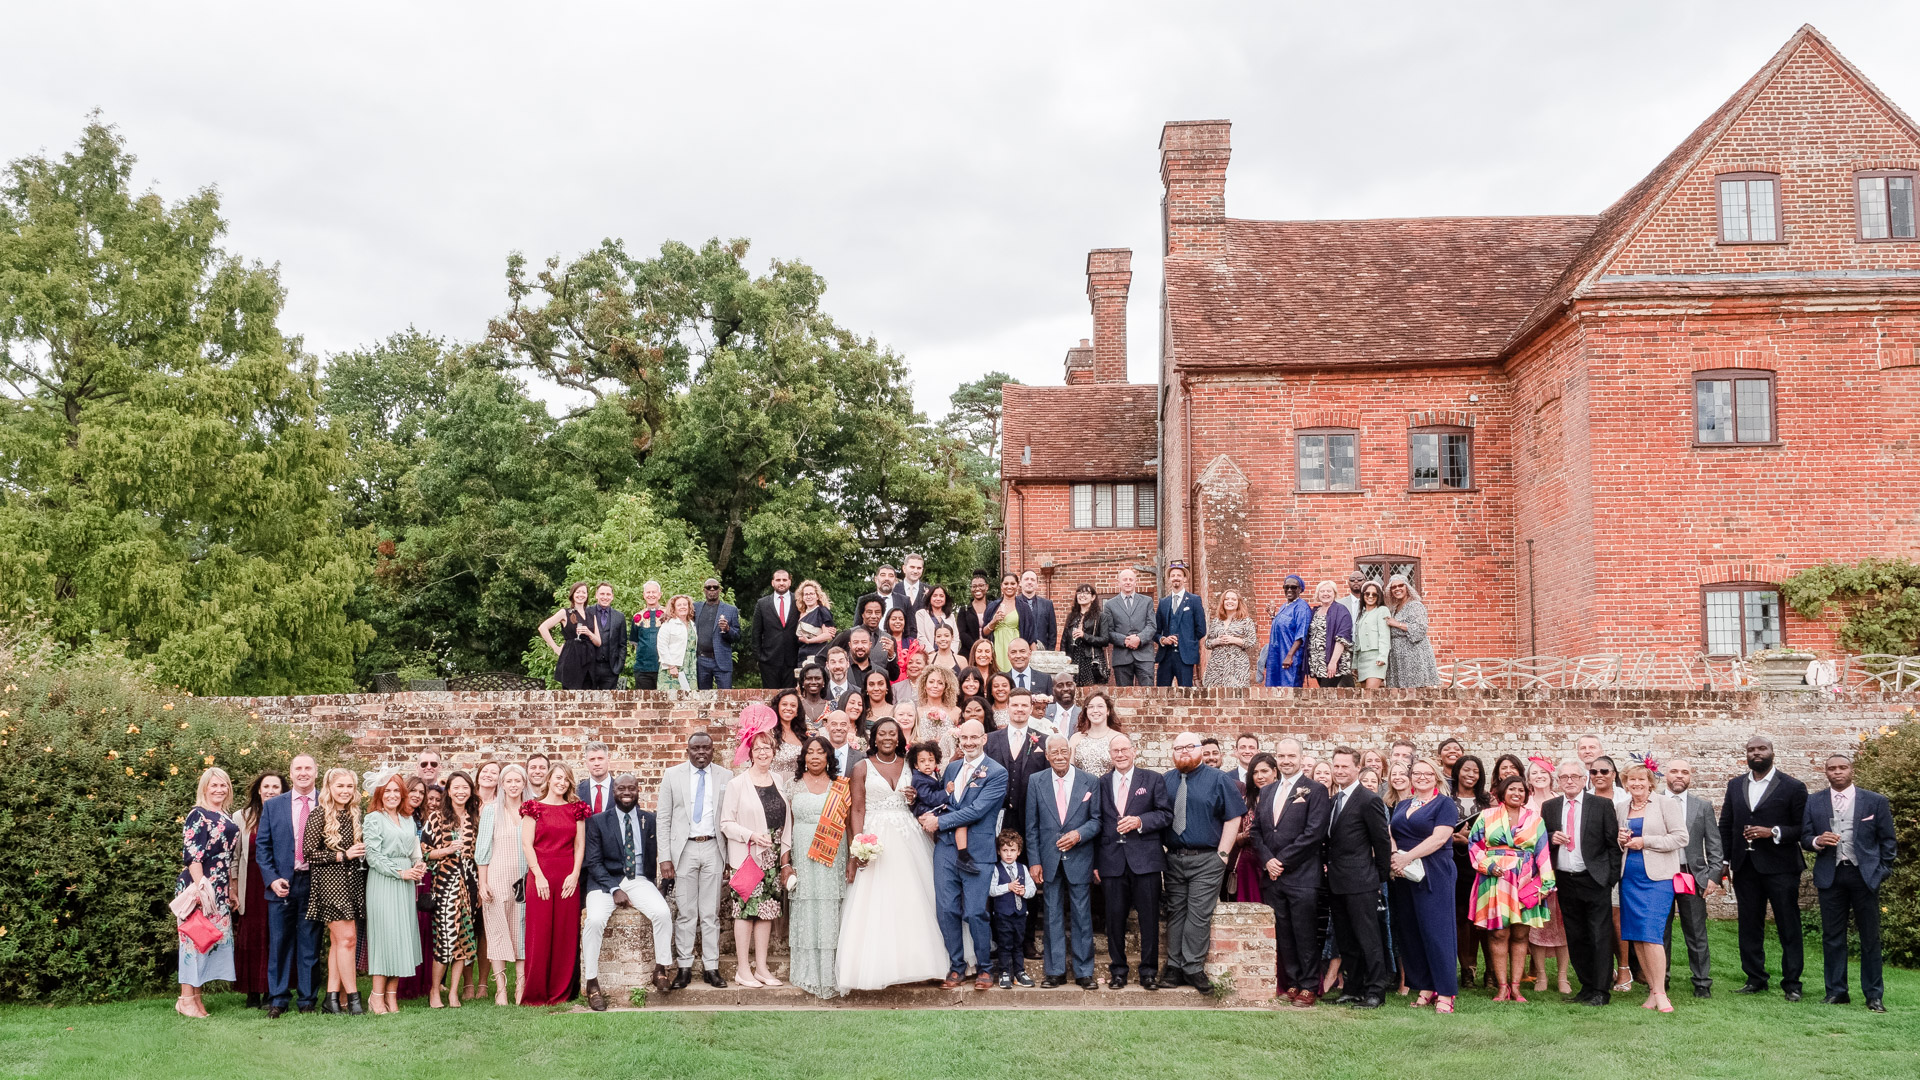 Wedding group photo in the garden at Ufton Court